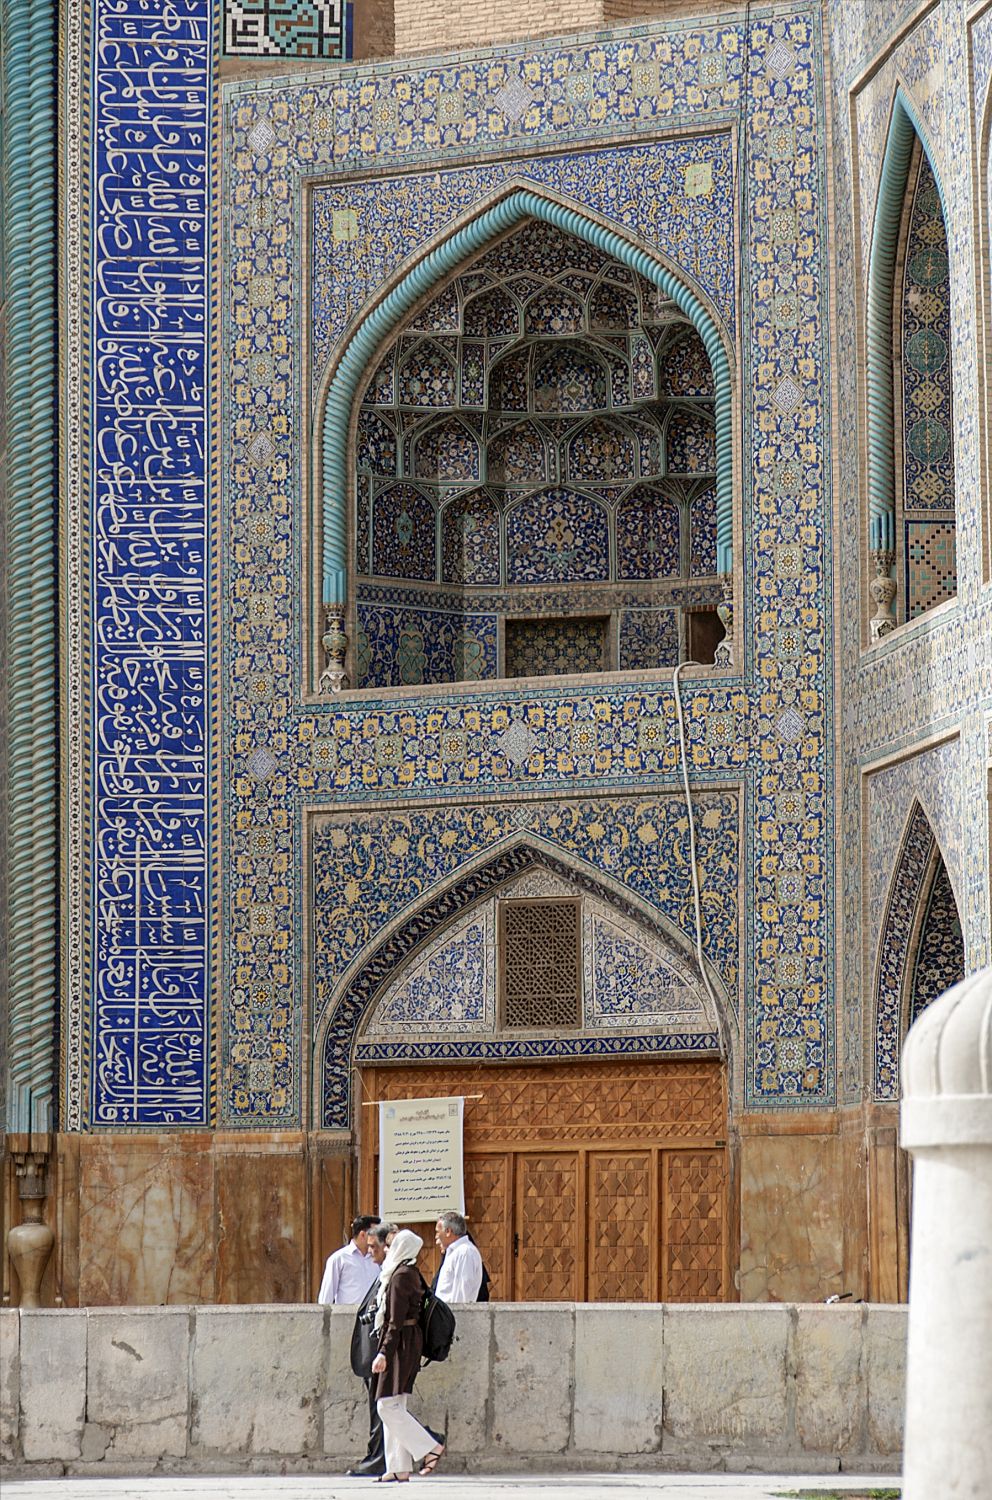 View of balcony with muqarnas vault in west flank of entry portal.